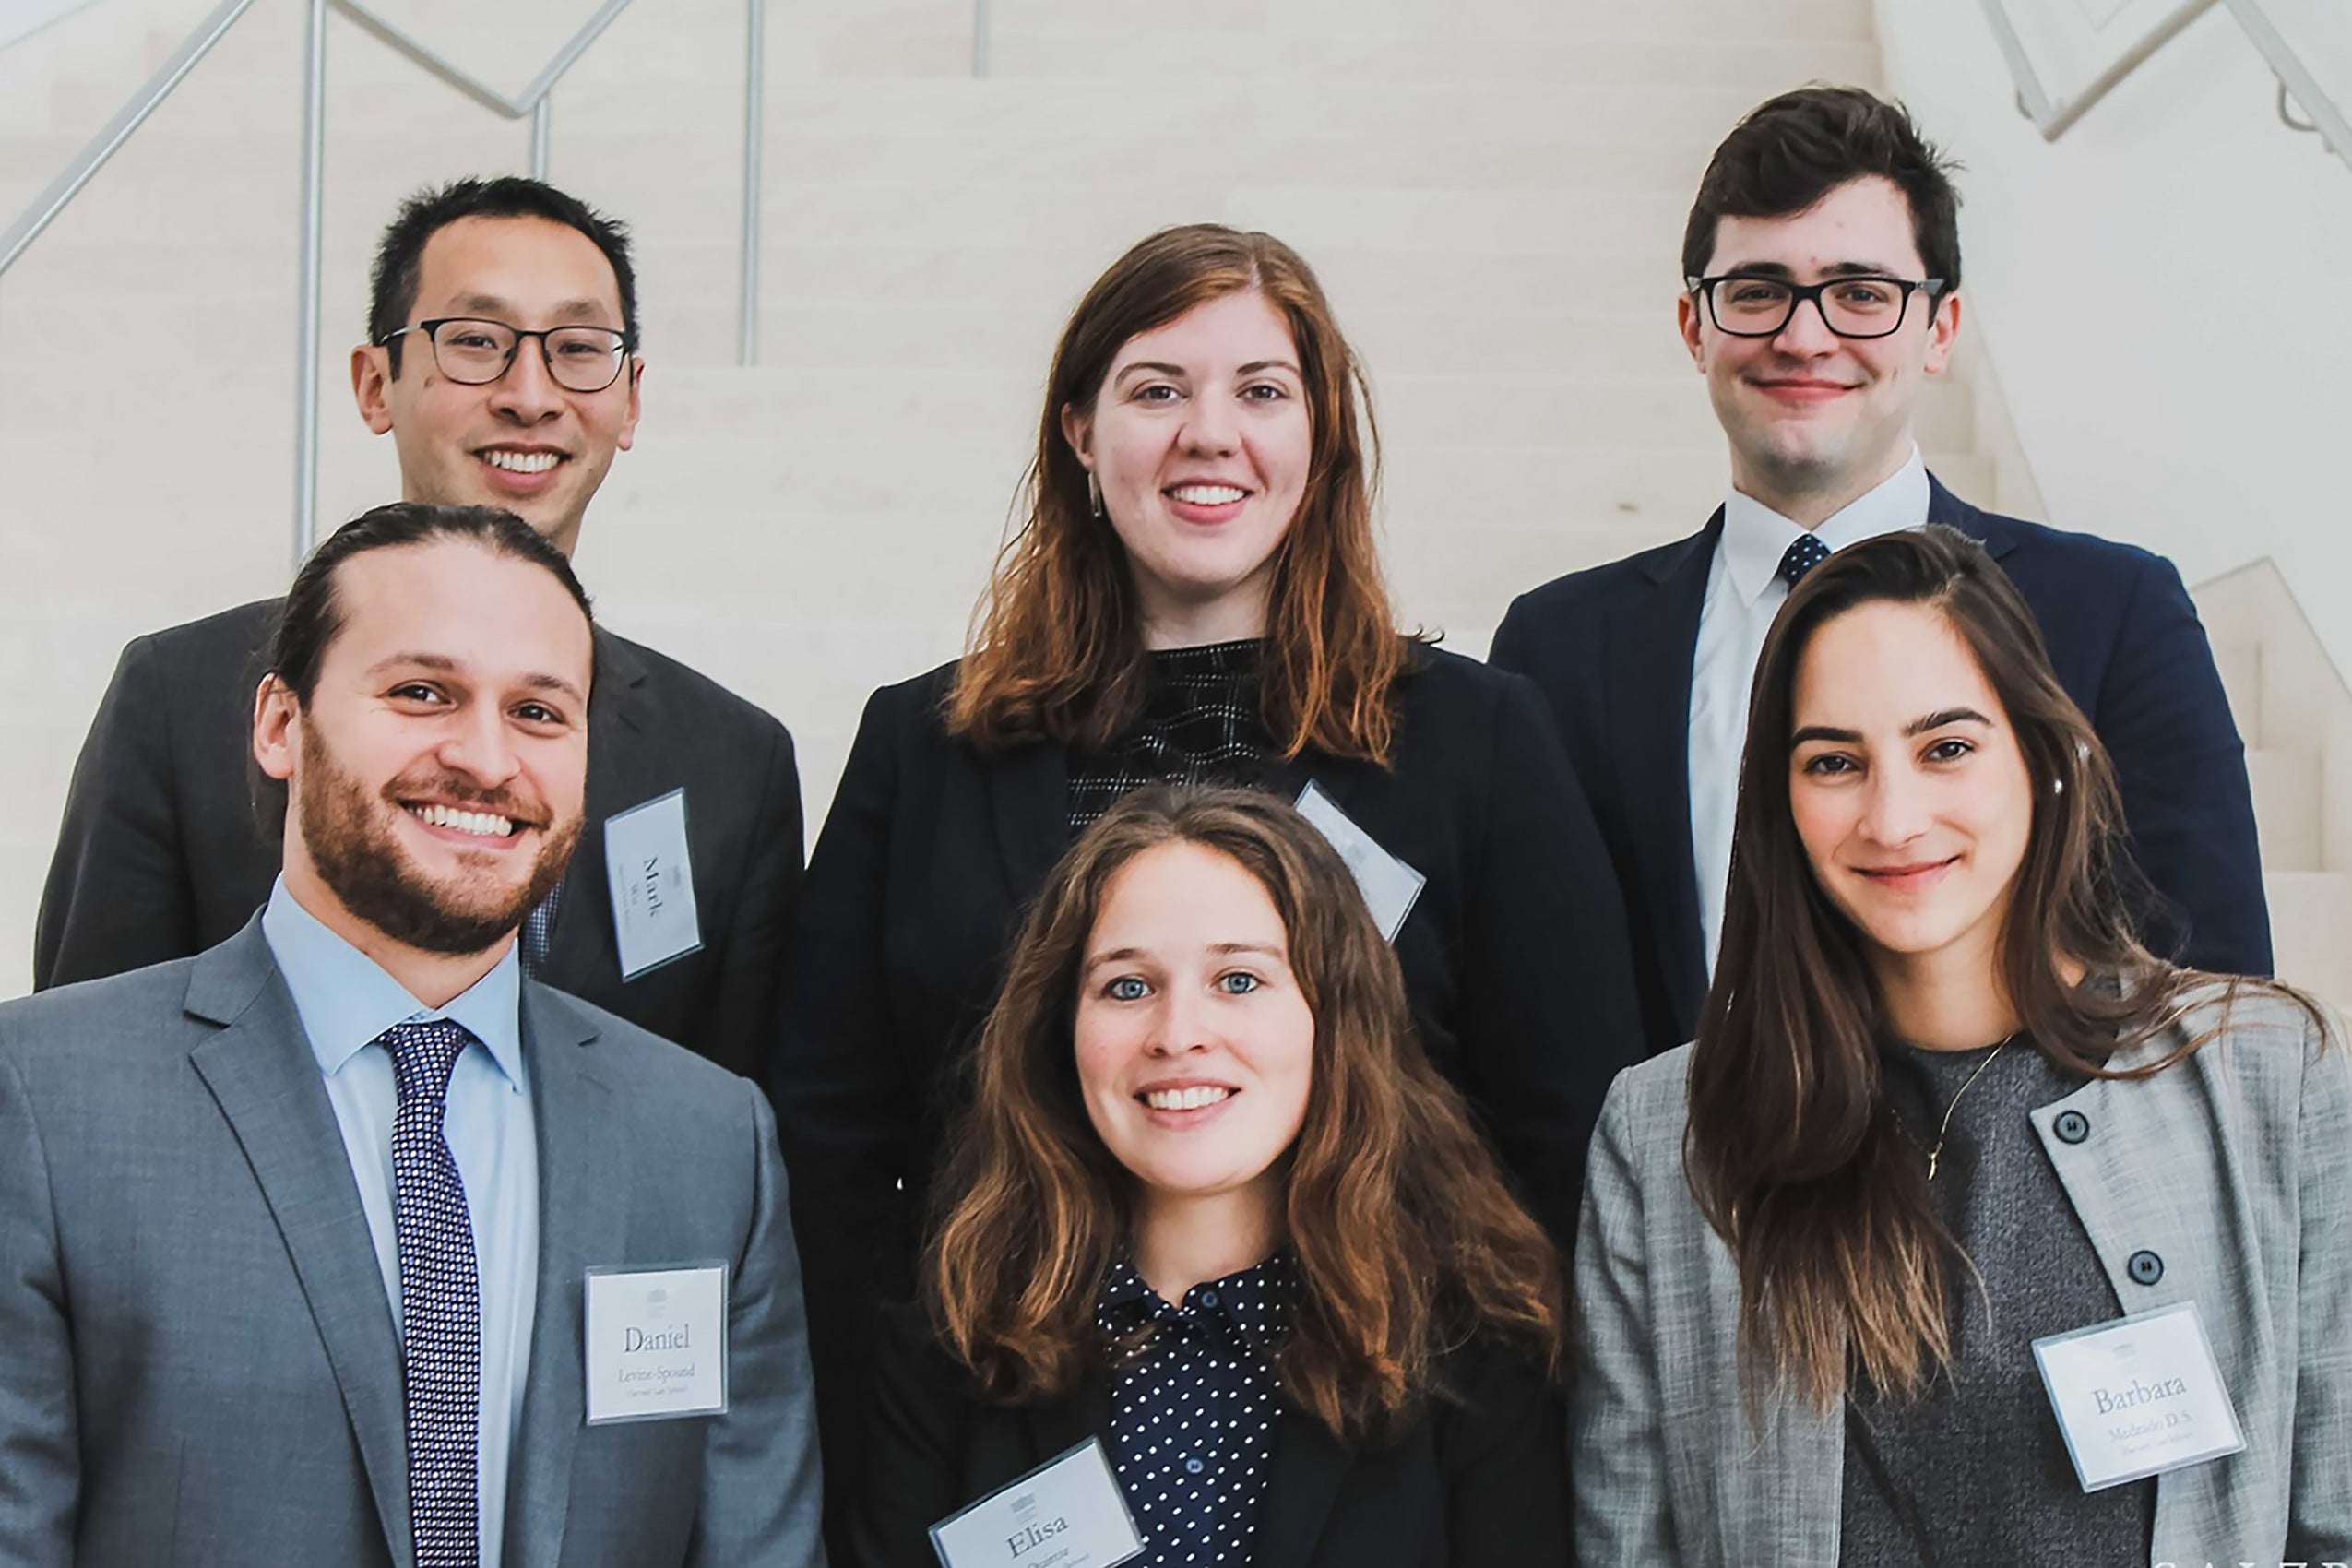 Sazlburg Cutler Fellows explore the global future of law and governance